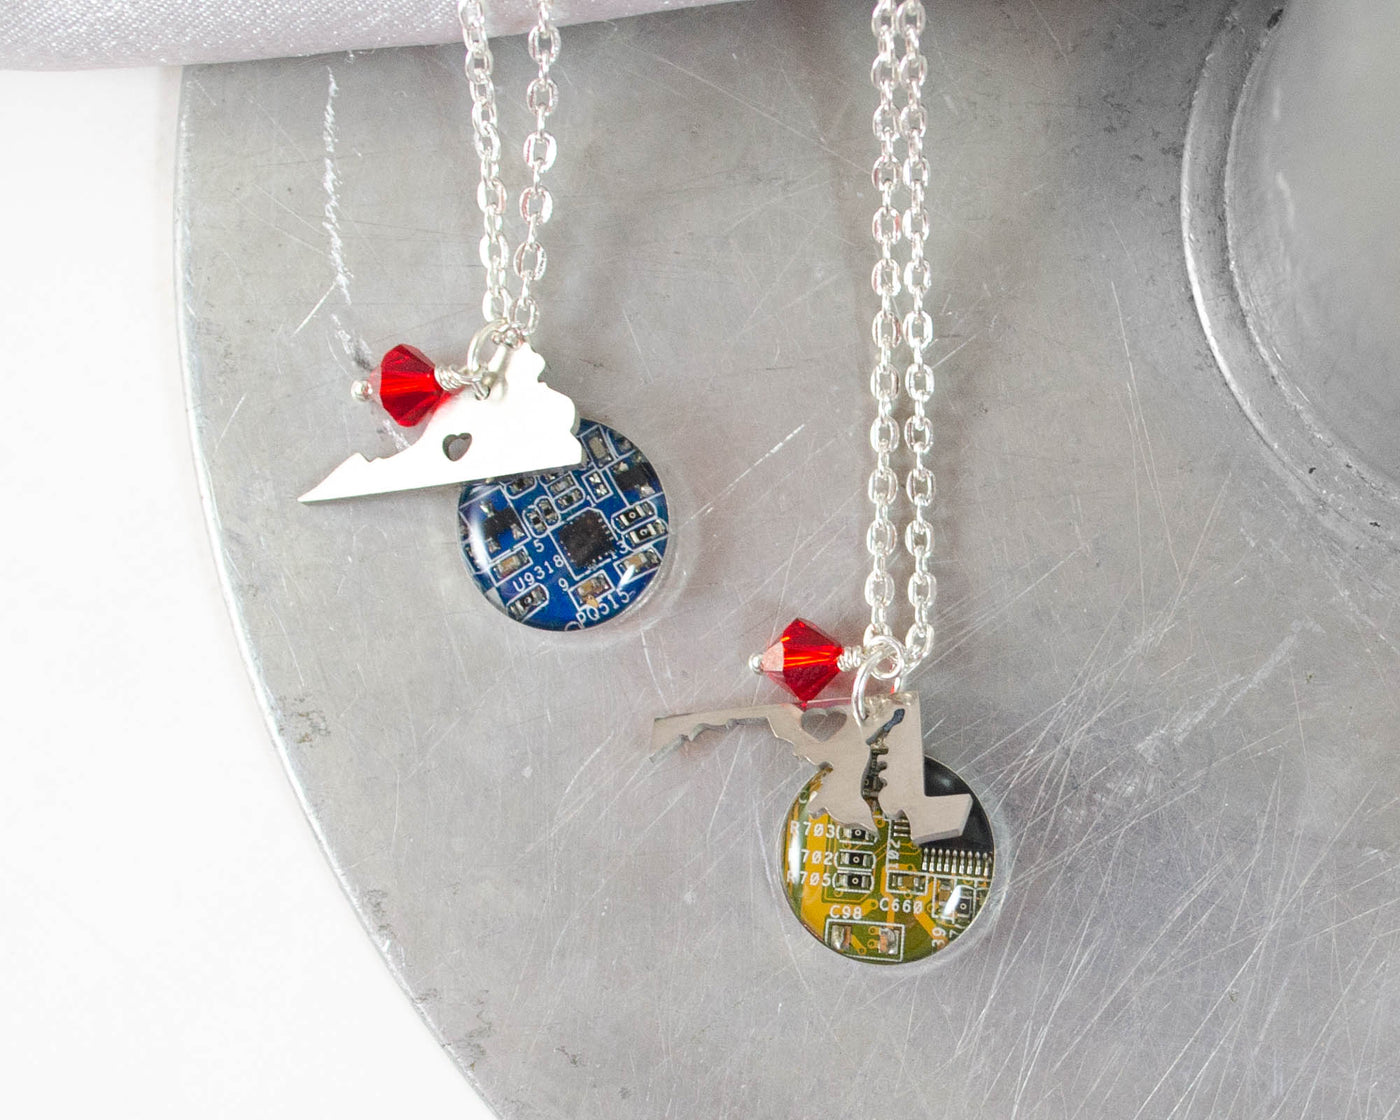 maryland and virginia geek charm necklaces with circuit board and crystal bead